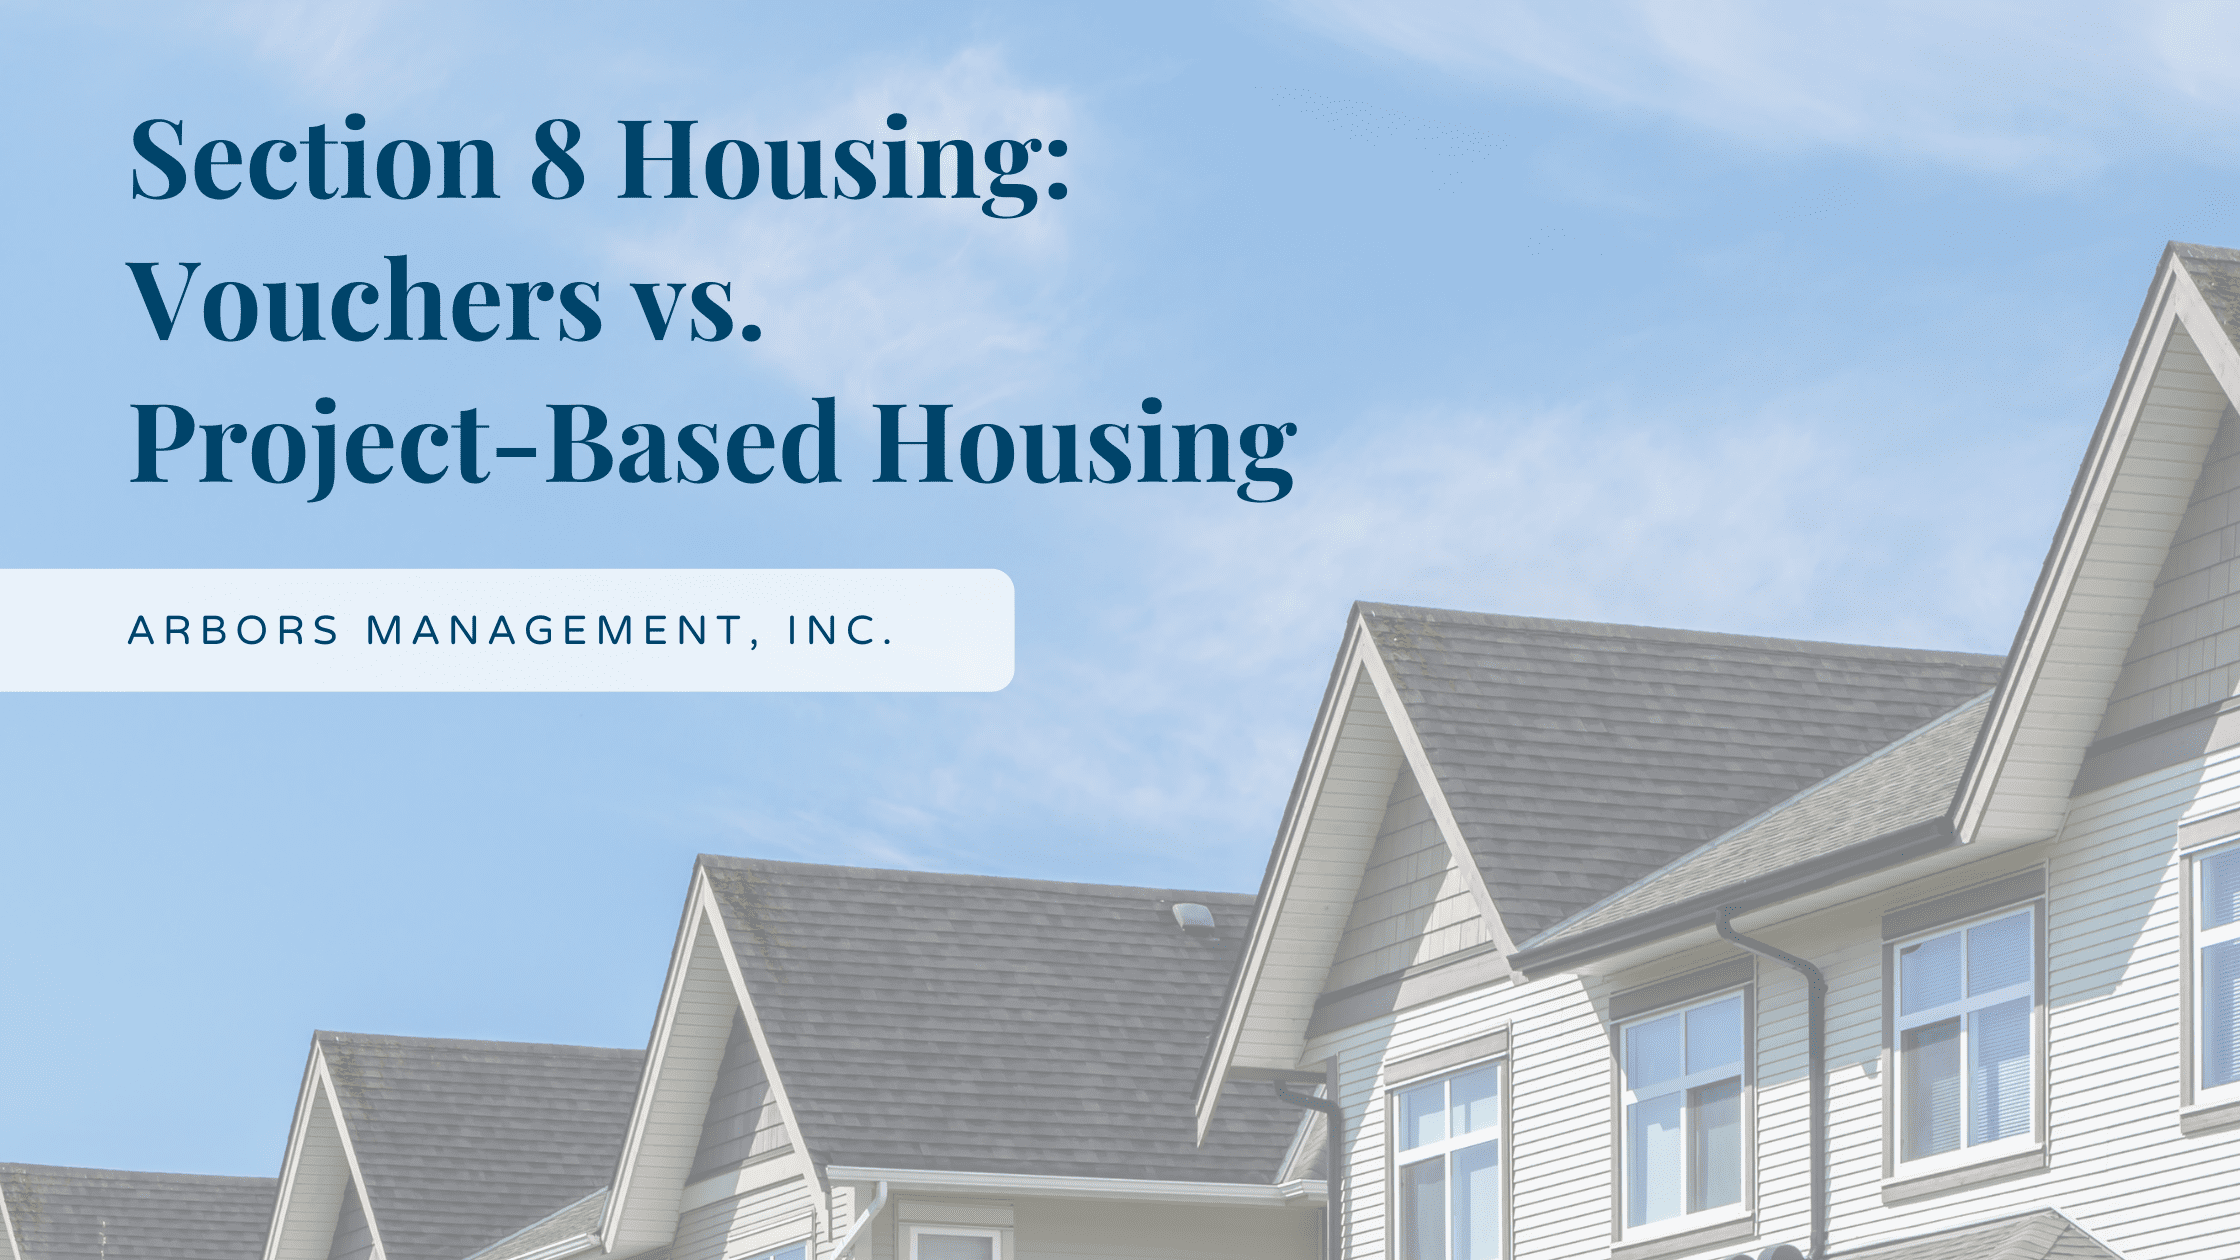 Section 8 Housing: Section 8 Vouchers vs. Project-Based Section 8 Housing